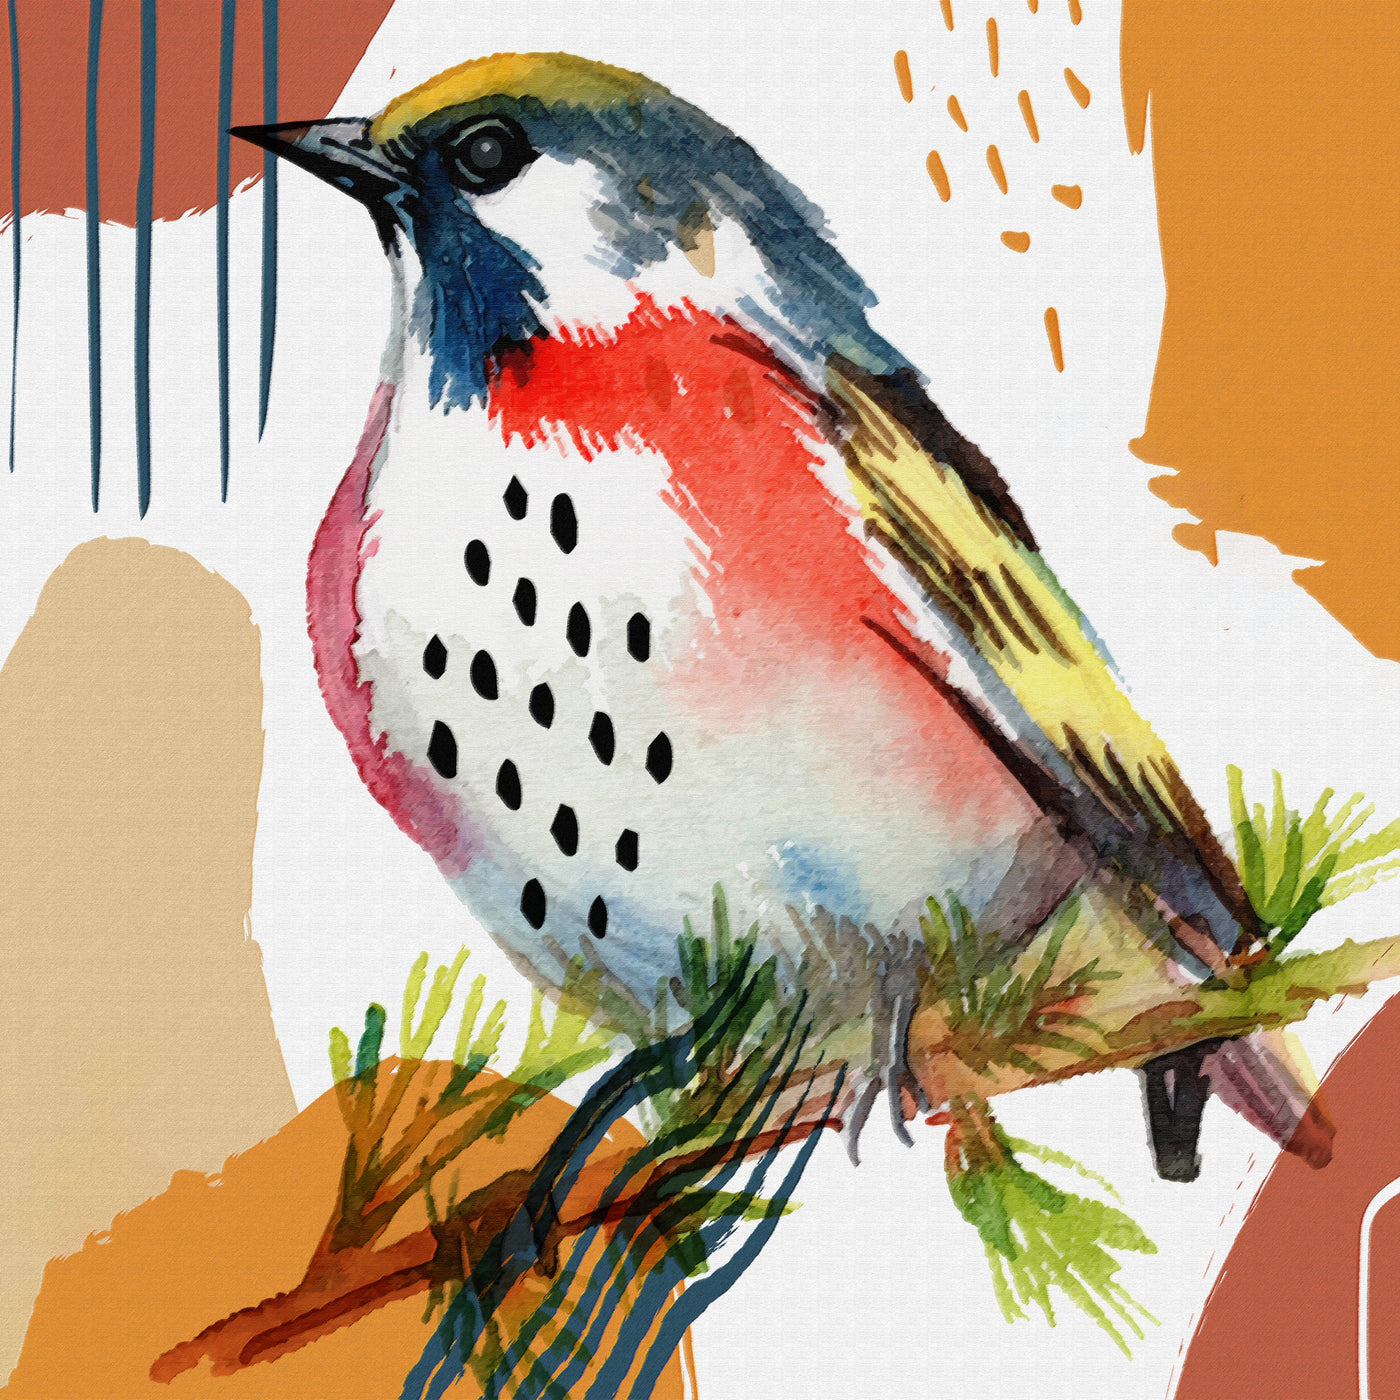 Bird On A Branch 343 - Gallery Wrapped Canvas